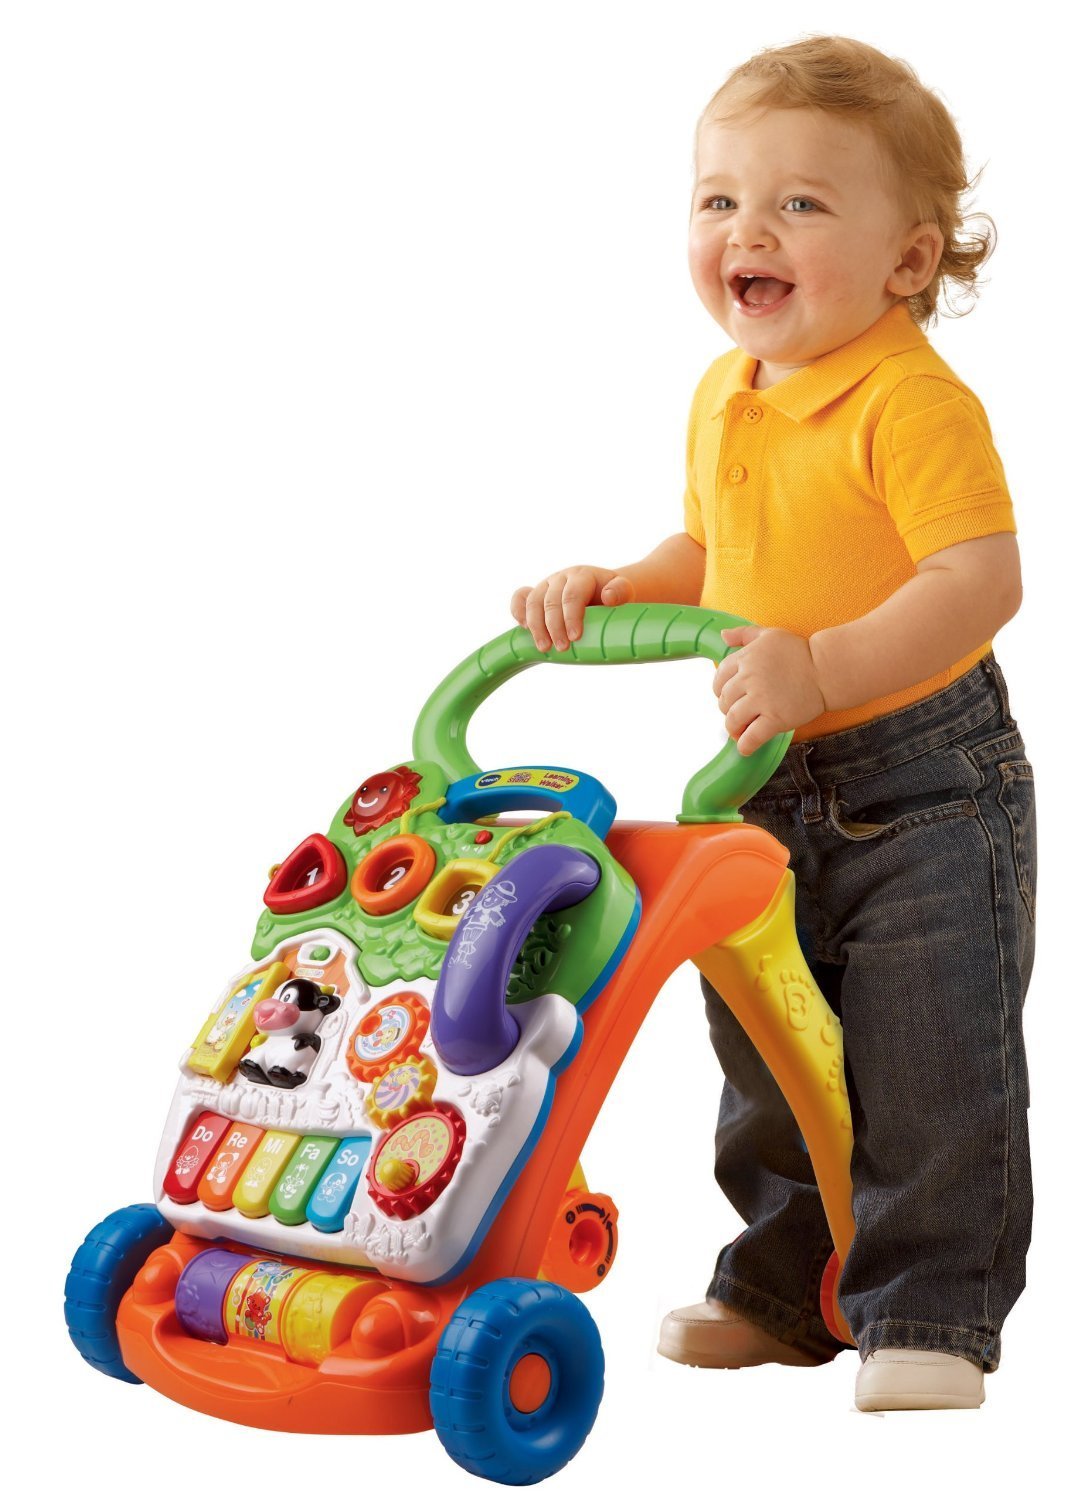 toys for kids learning to walk